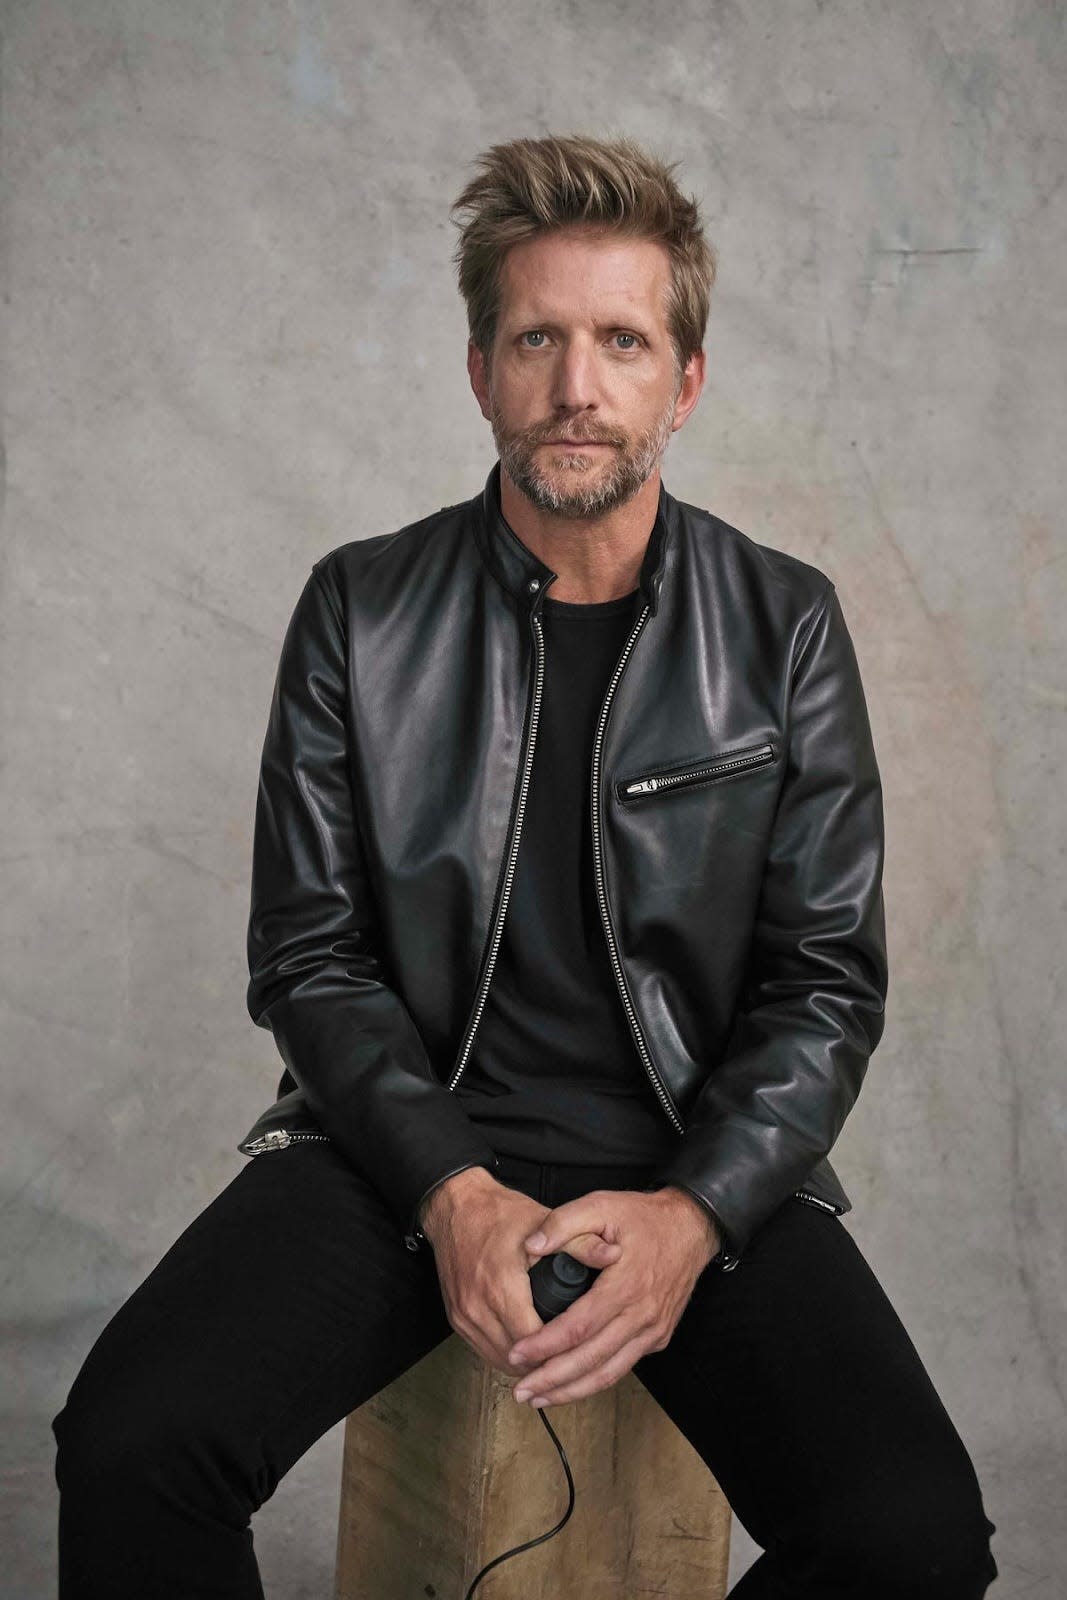 Actor Paul Sparks, who hails from Lawton, will be honored as an Oklahoma Film Icon at Oklahoma City's 2024 deadCenter Film Festival.